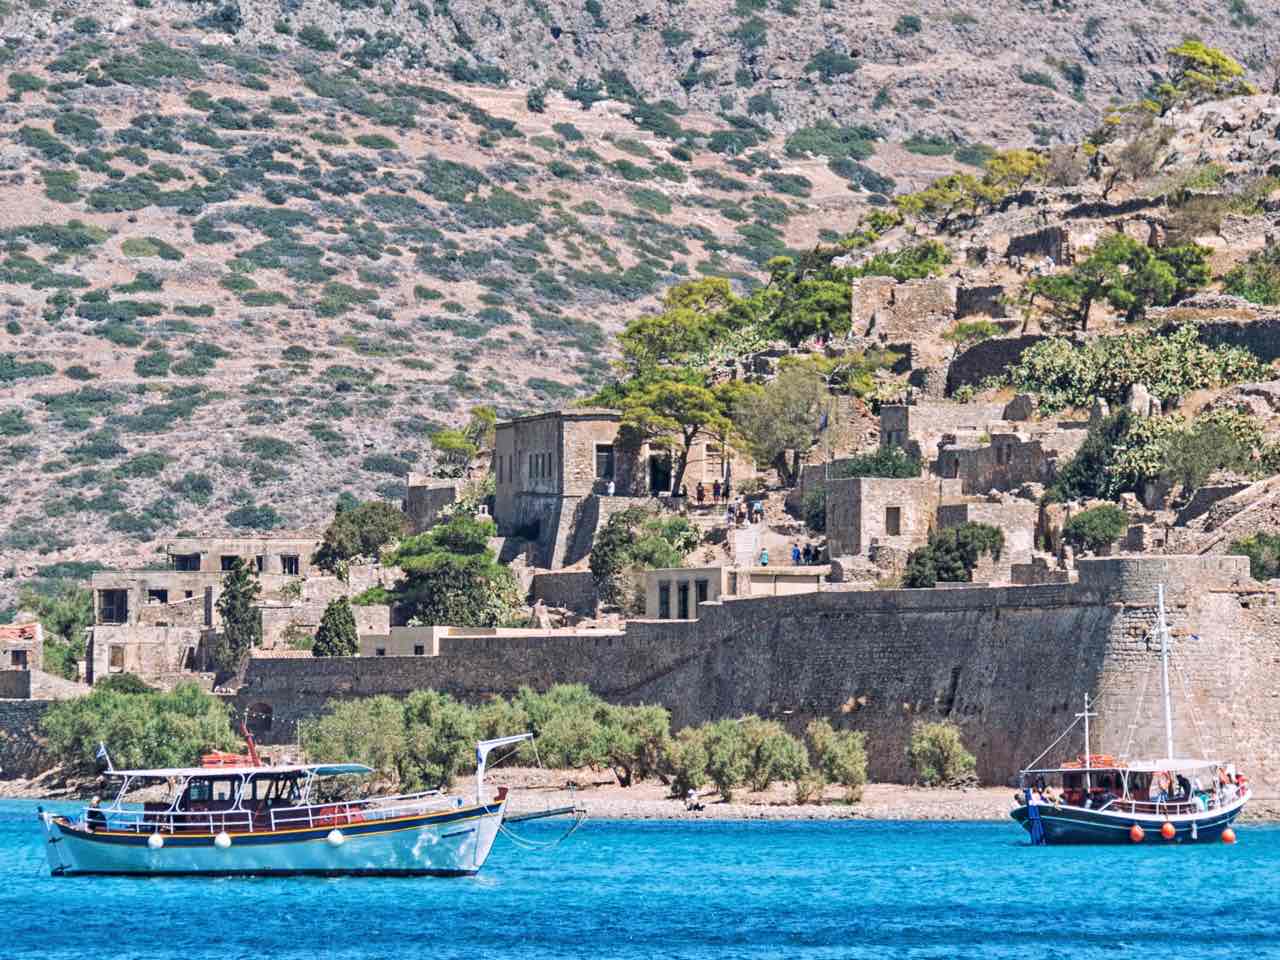 Calls for Minoan Civilization, Spinalonga to be Named UNESCO World Heritage Sites